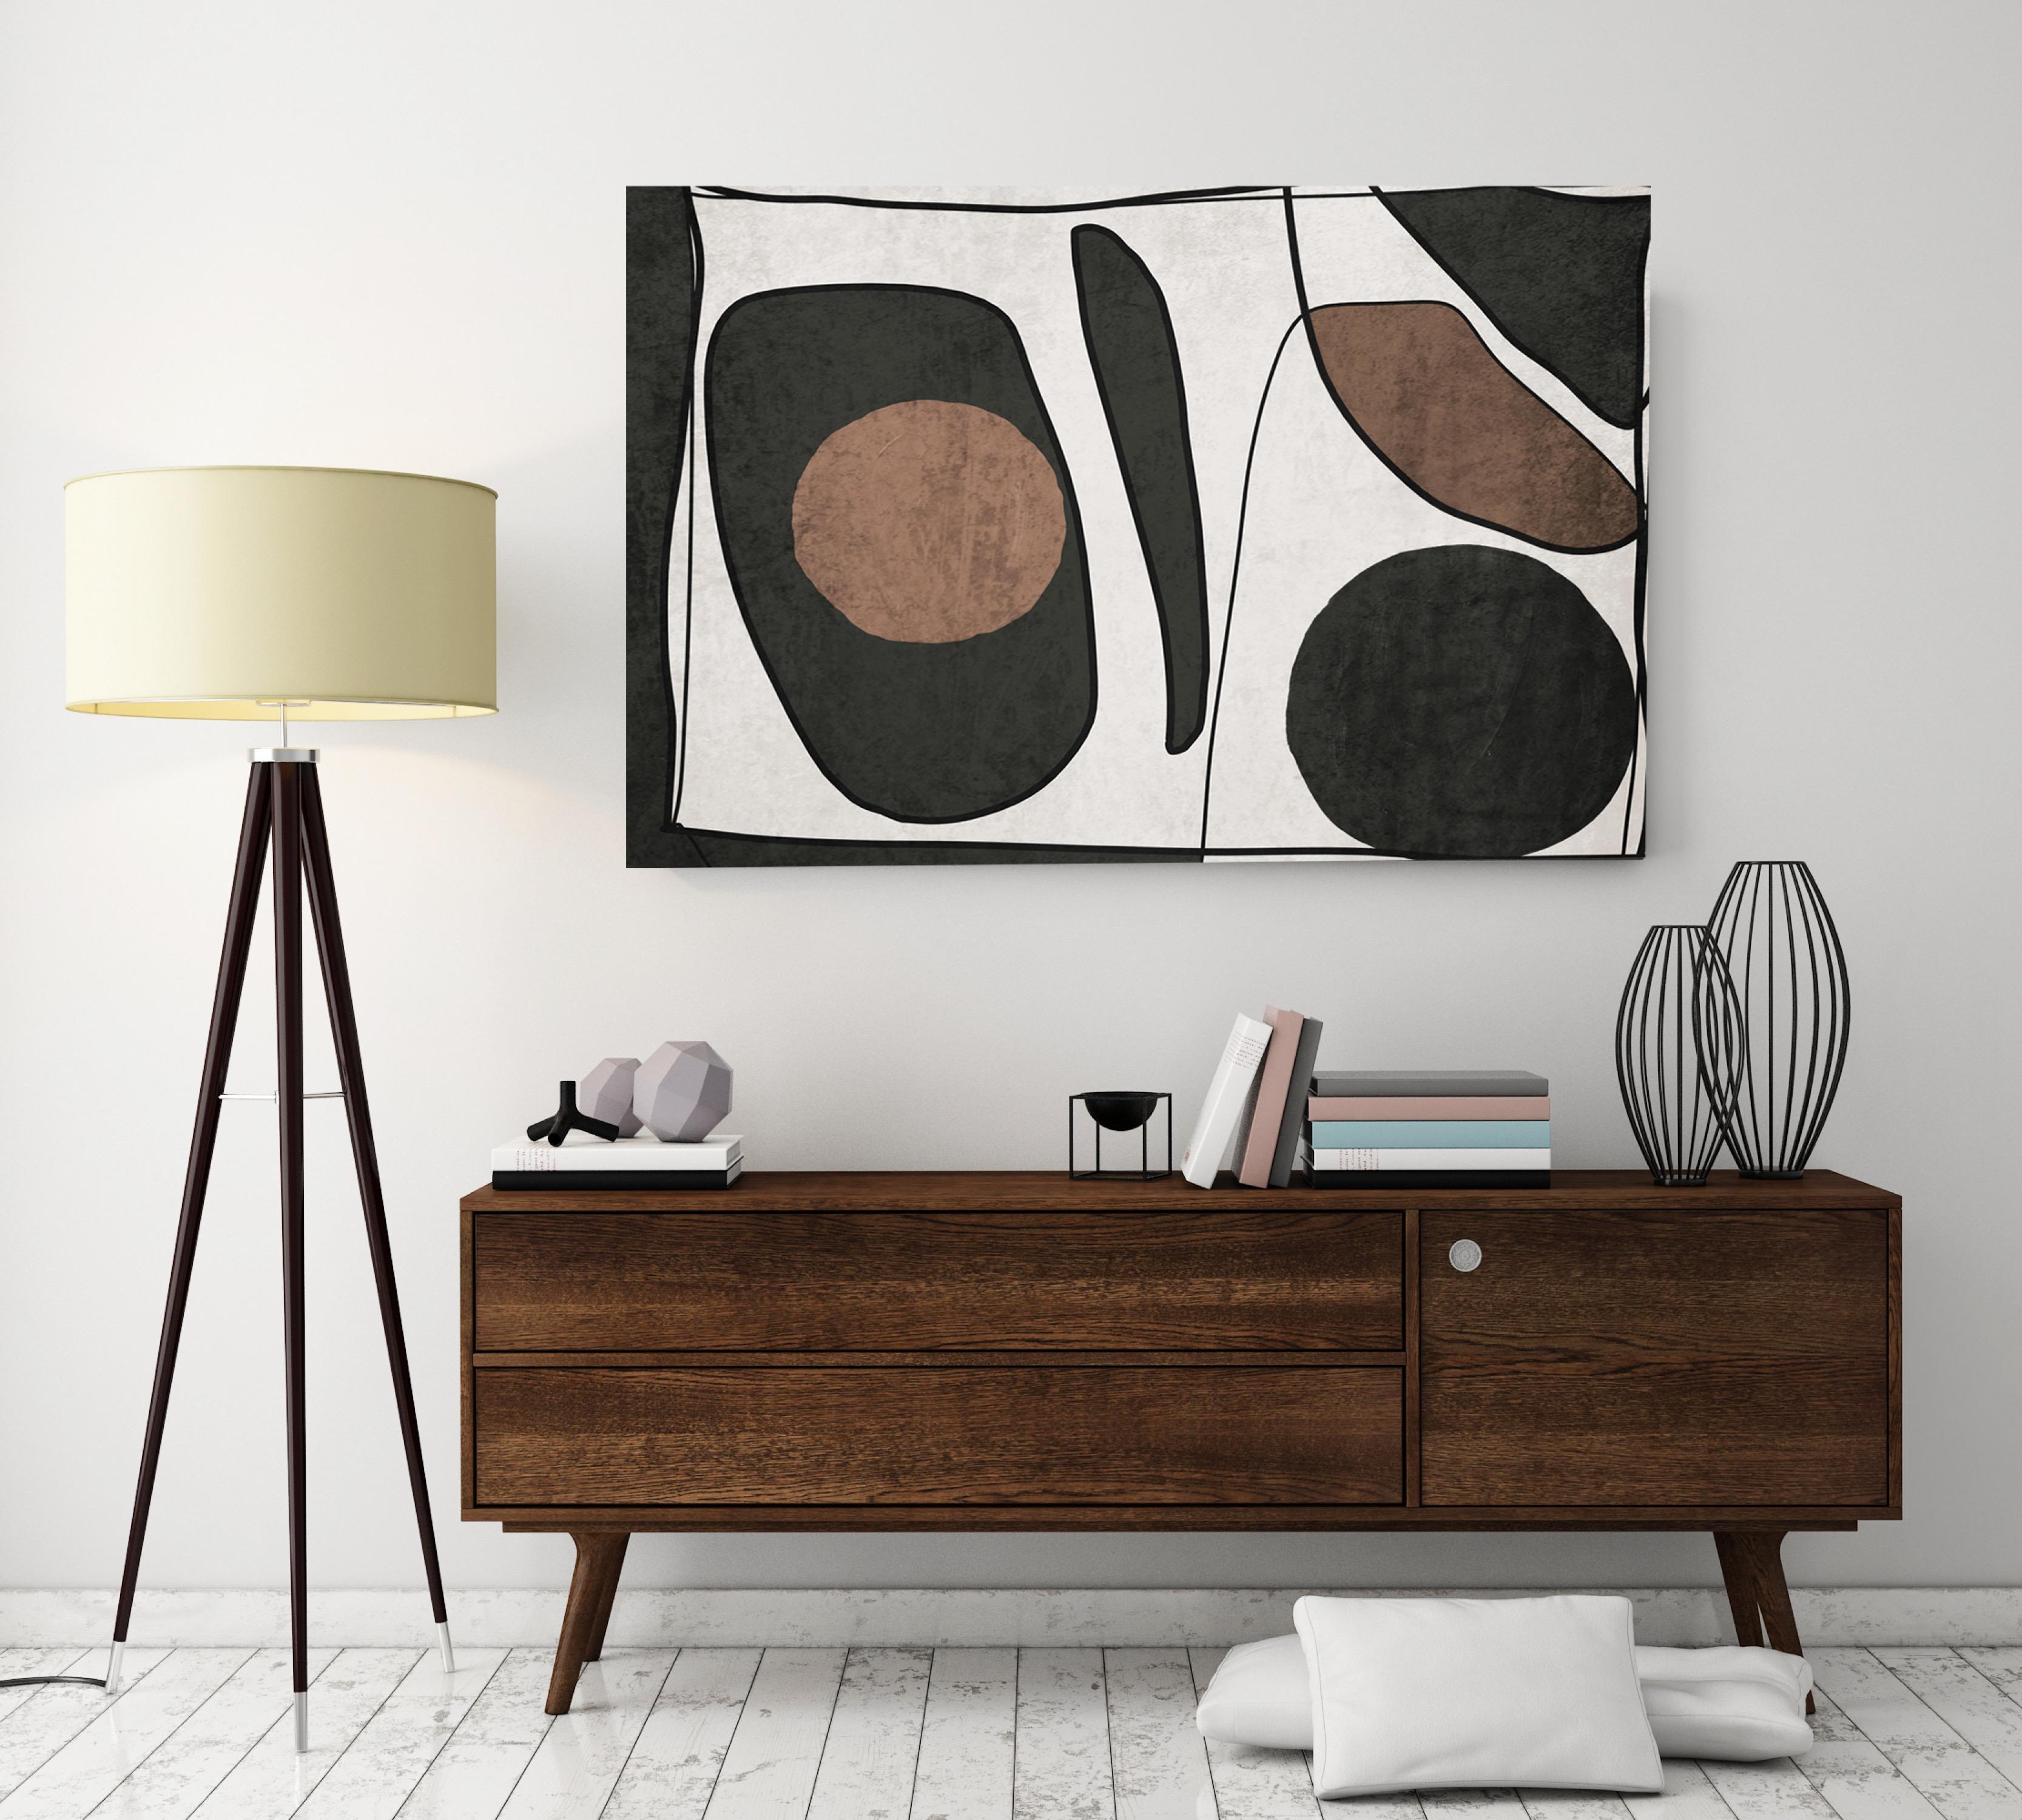 MidCentury Organic Shapes and Lines N-10-104 Mixed Media Canvas Painting 40x60" - Mixed Media Art by Irena Orlov